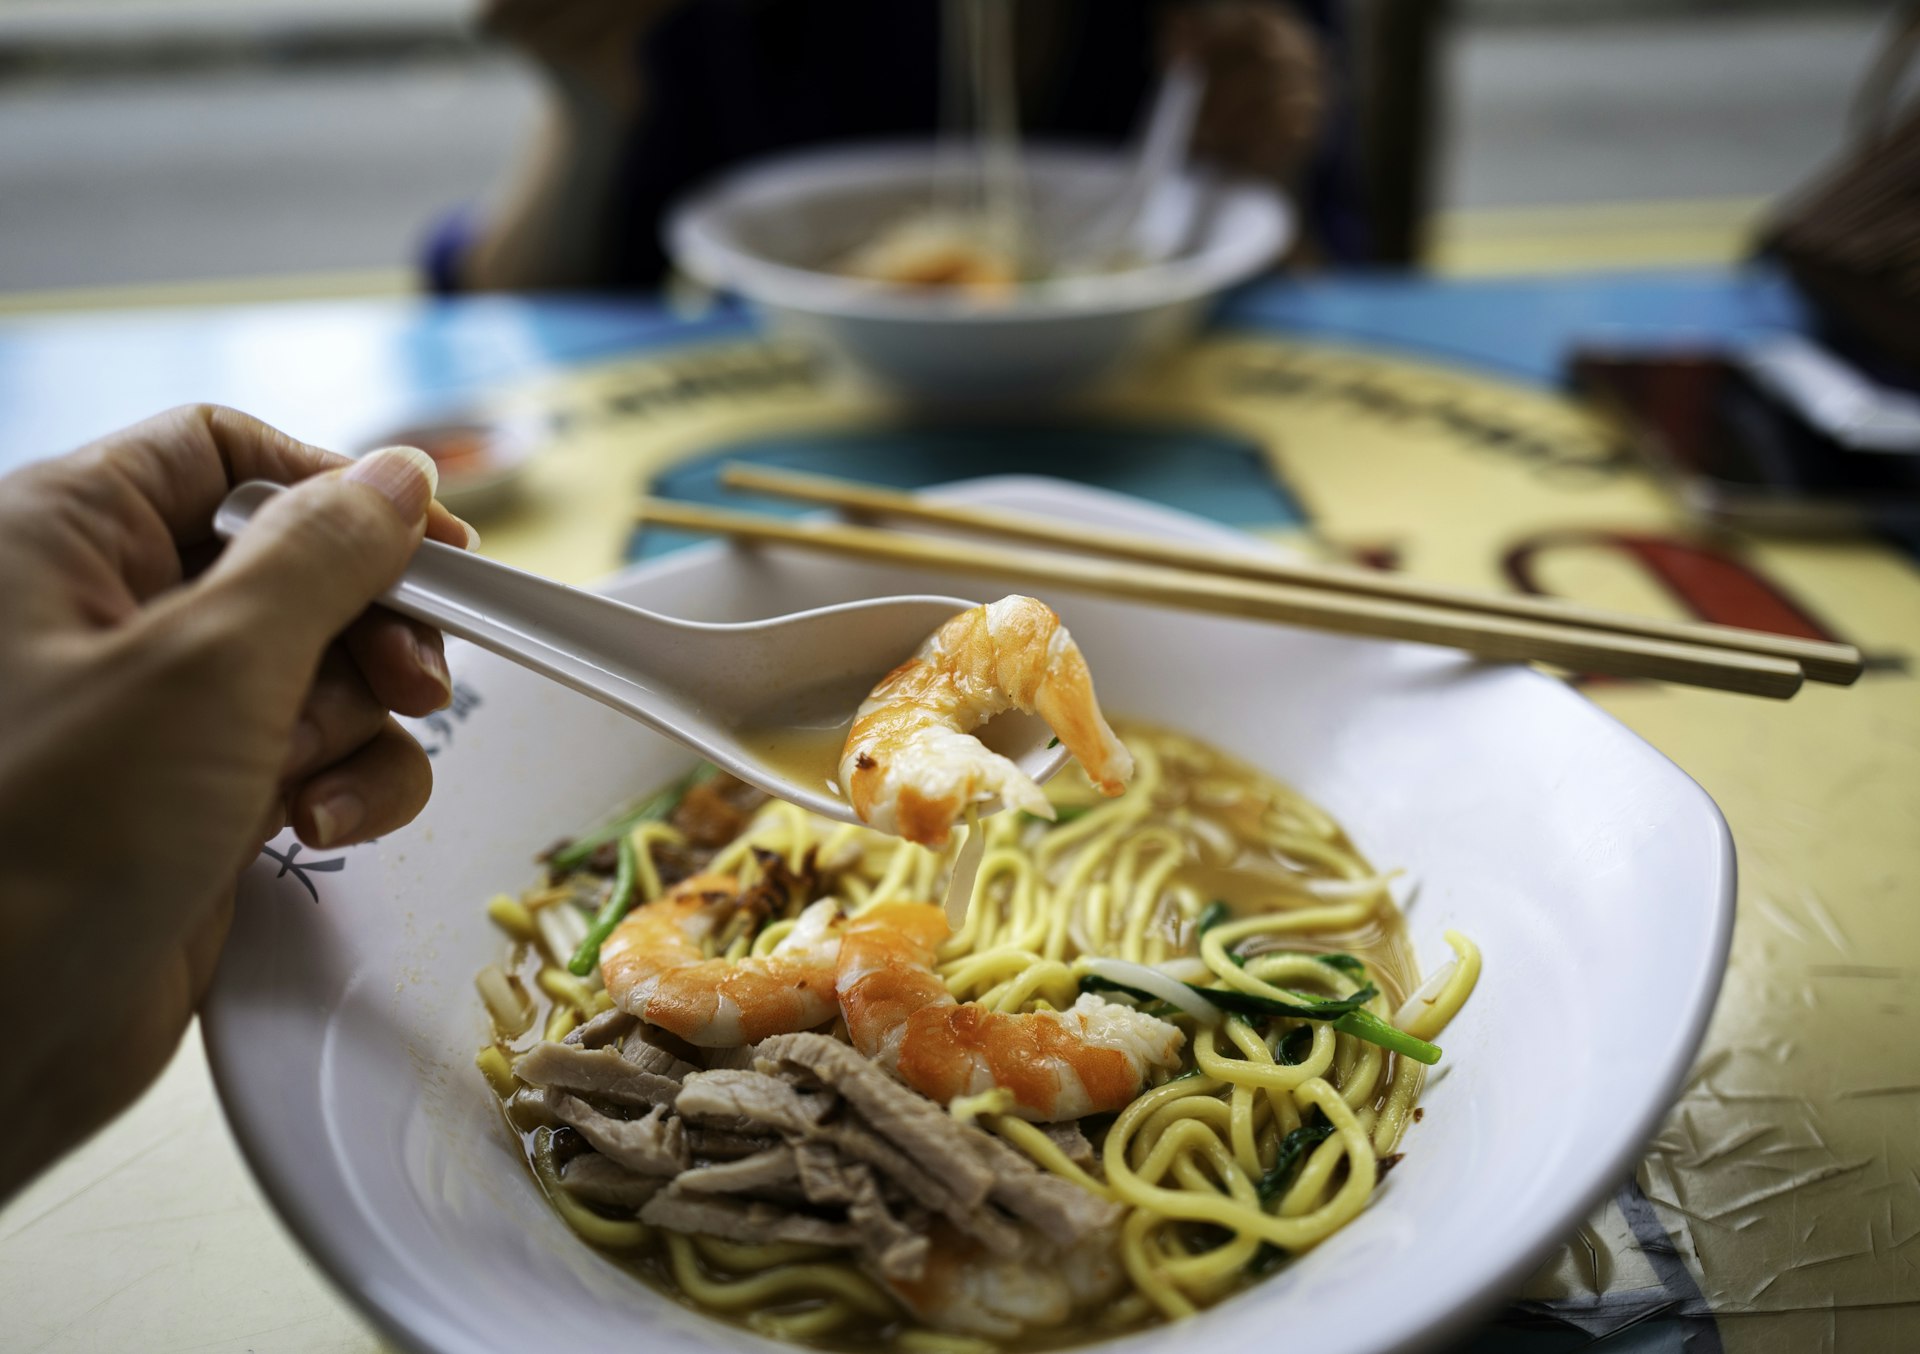 A person uses a spoon to eat a famous prawn noodle dish in Singapore